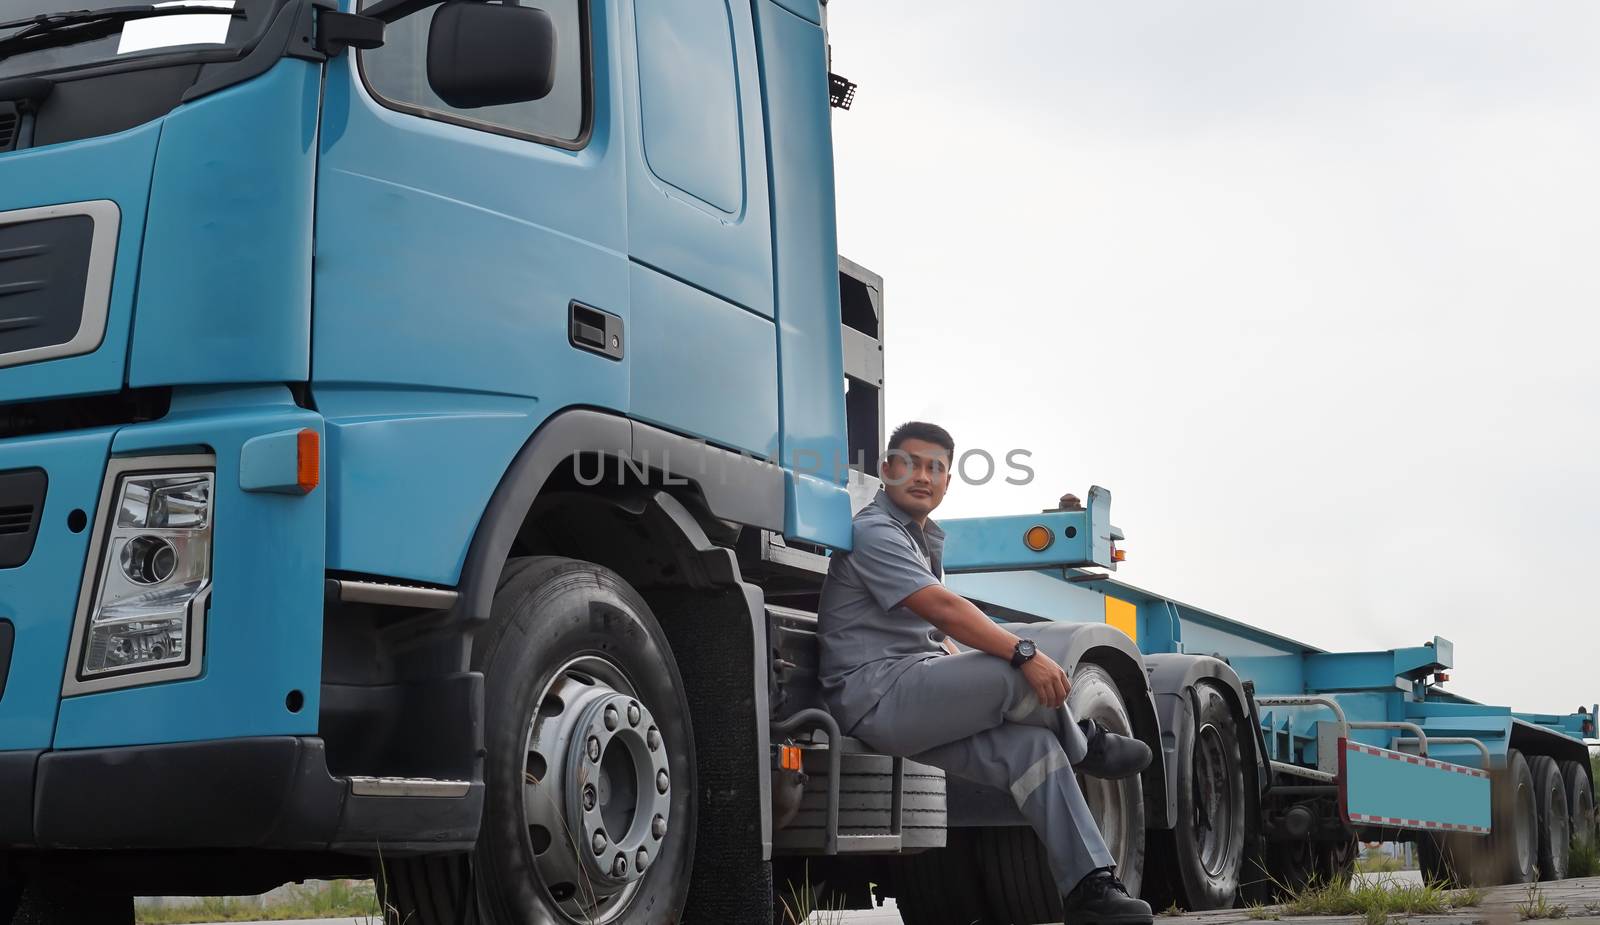 Asian young man Is a truck driver in the transportation business Equipped with large blue trucks Parking a car on the side of the road